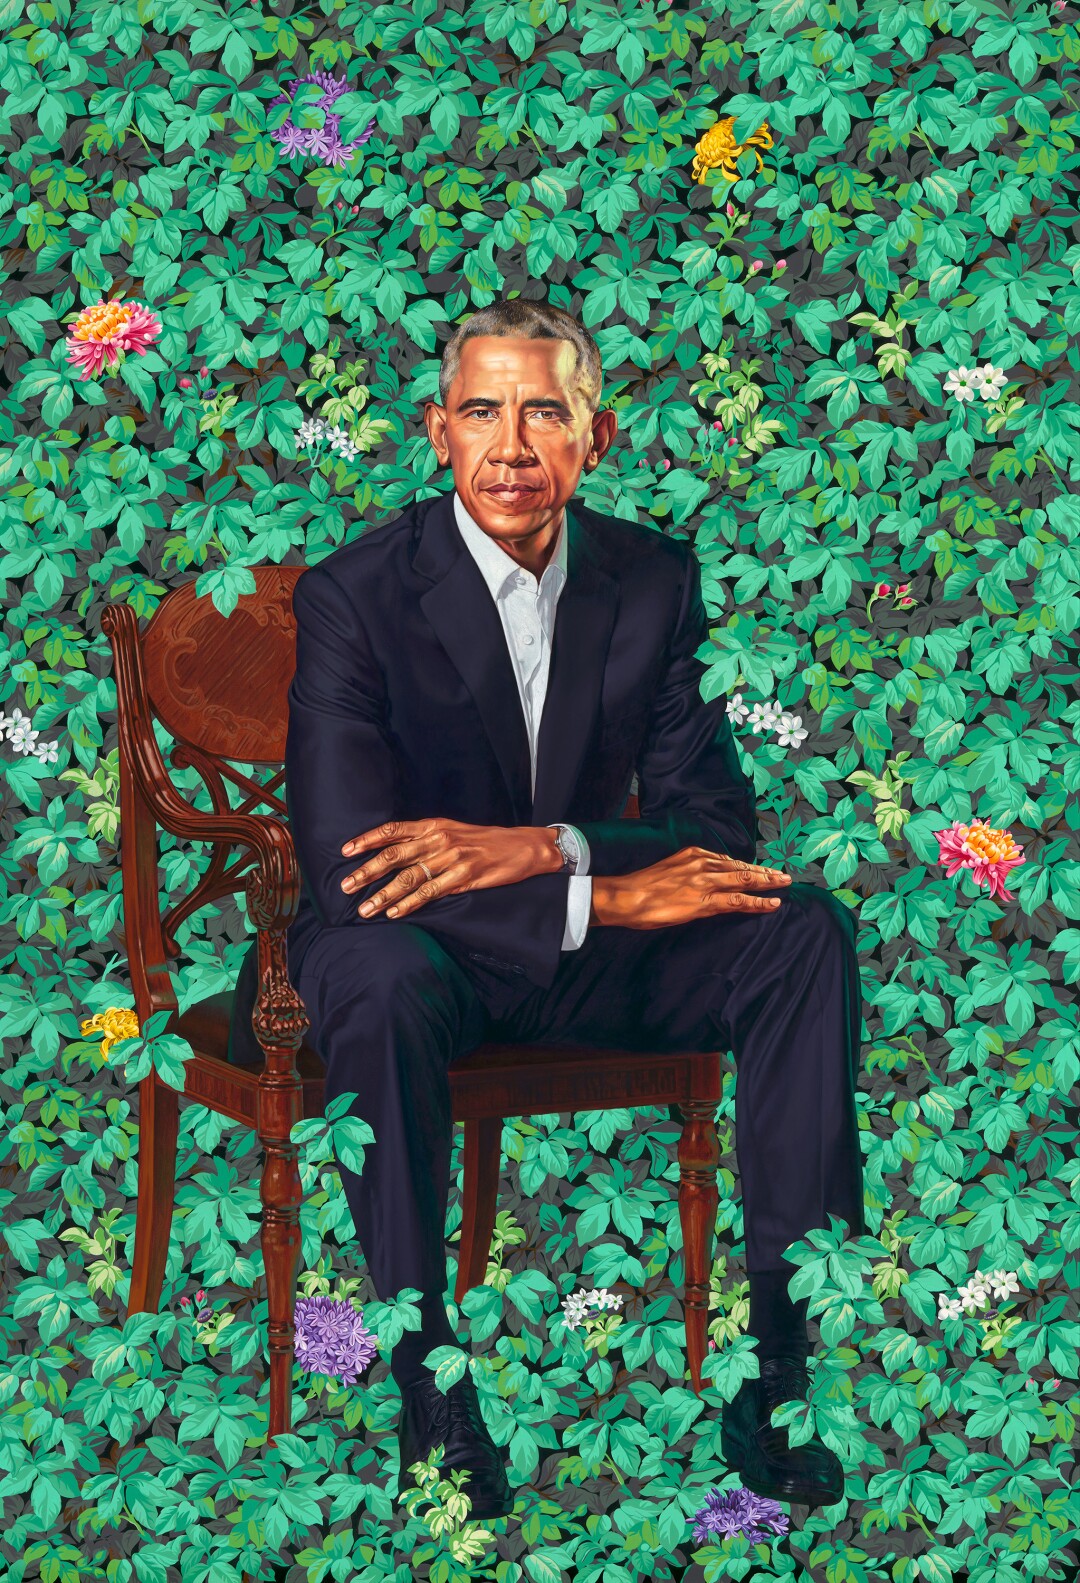 Kehinde Wiley, Barack Obama, 2018, oil on canvas, National Portrait Gallery, Smithsonian Institution © 2018 Kehinde Wiley.